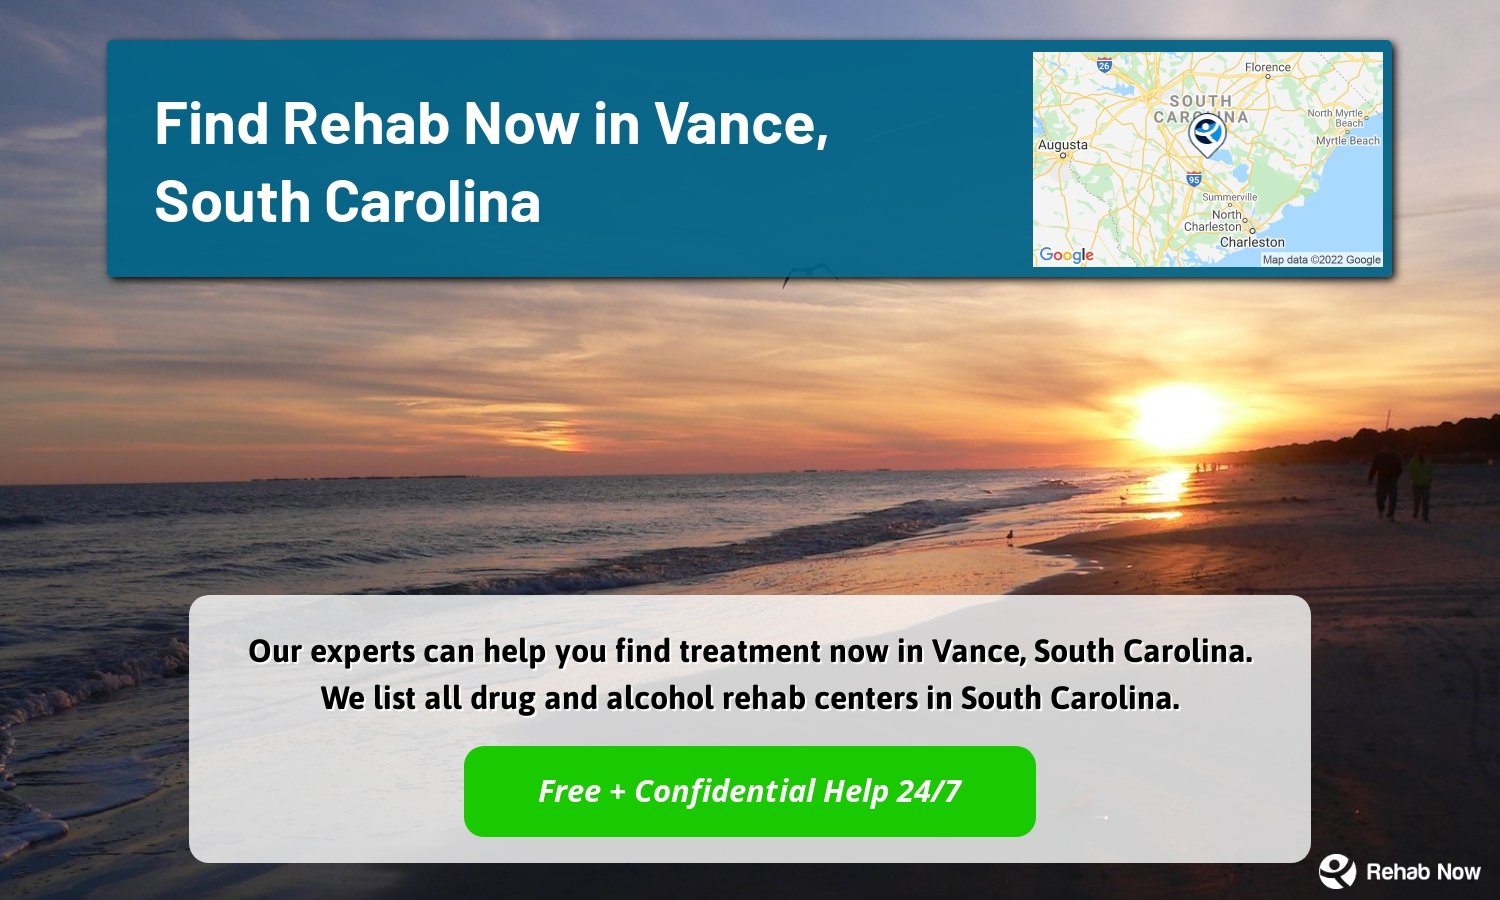 Our experts can help you find treatment now in Vance, South Carolina. We list all drug and alcohol rehab centers in South Carolina.